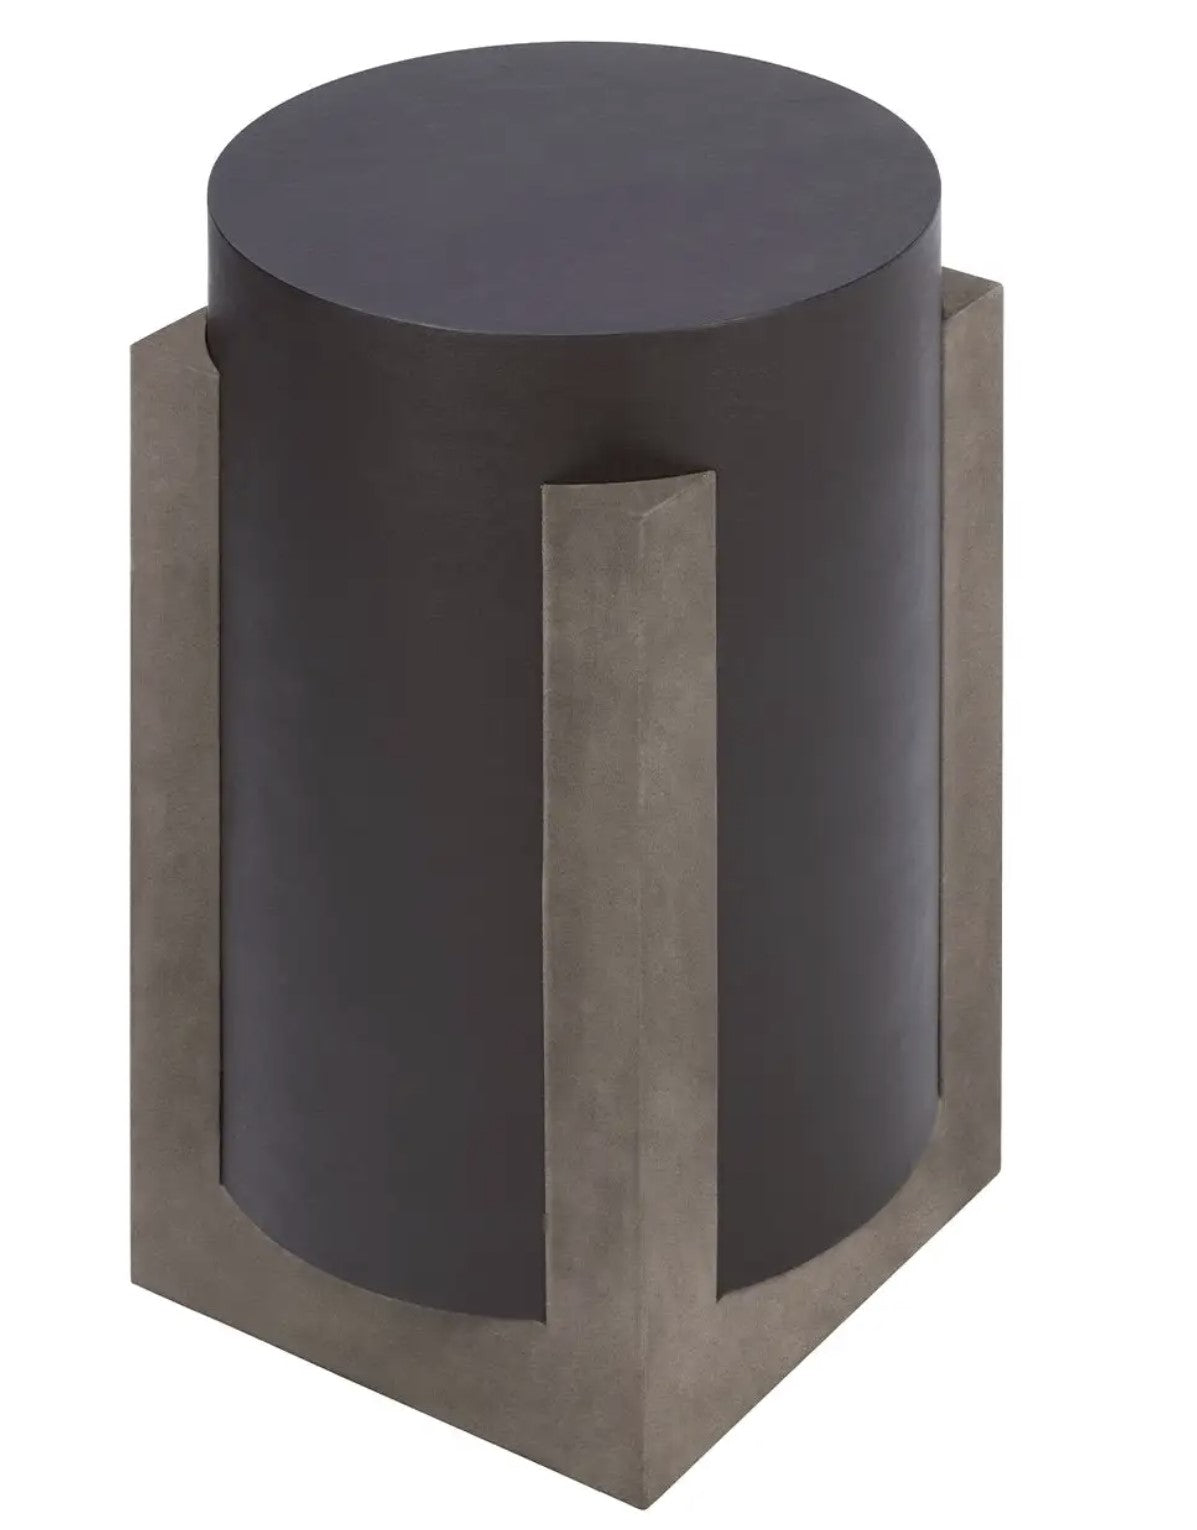 GIOBAGNARA - CONTEMPORARY LEATHER SIDE TABLE $2,259.00